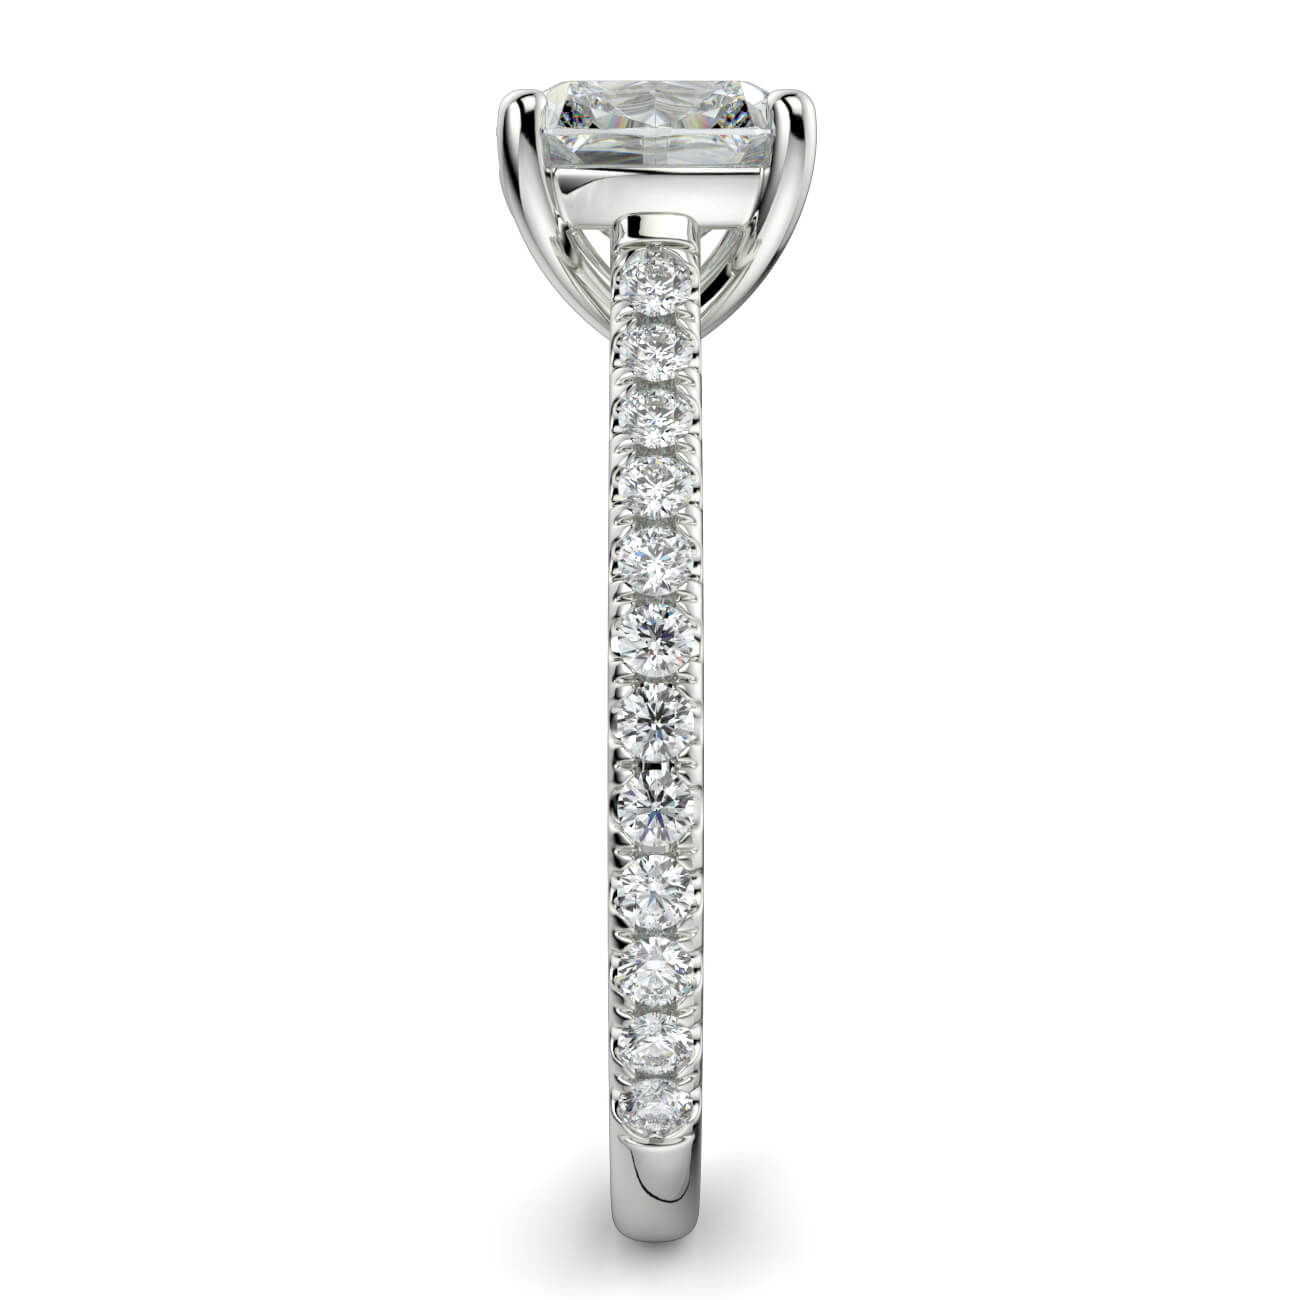 Cushion Cut diamond cathedral engagement ring in white gold – Australian Diamond Network